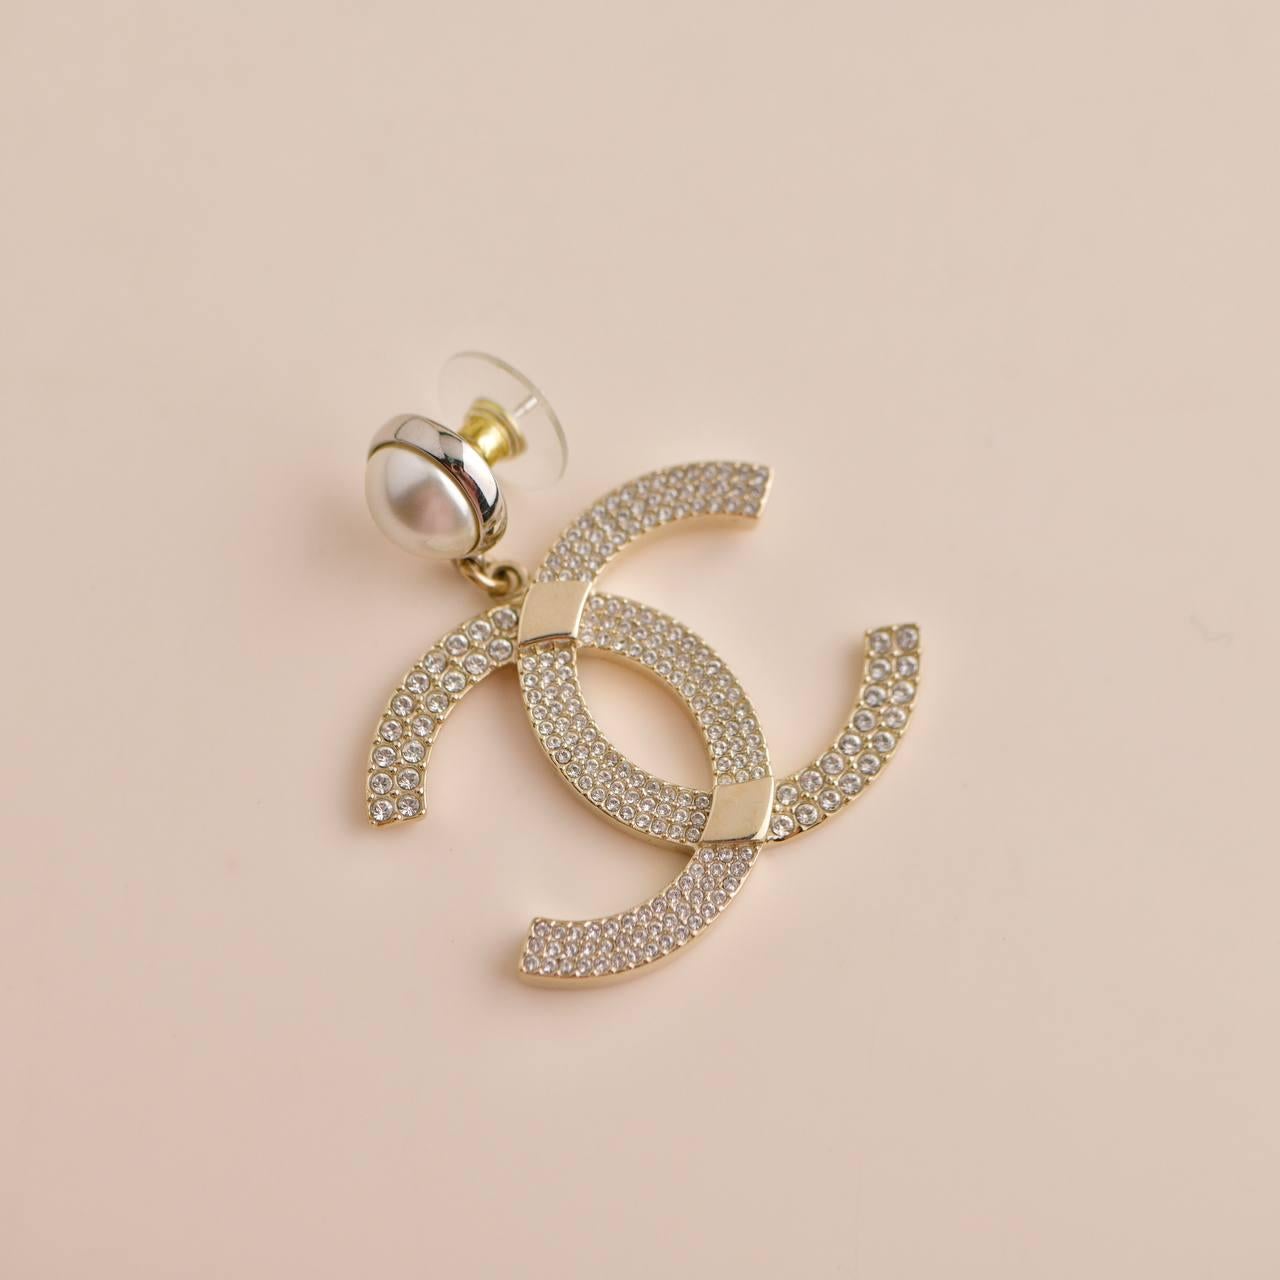 Women's Chanel CC Faux Pearl Earrings From The 2021 Collection